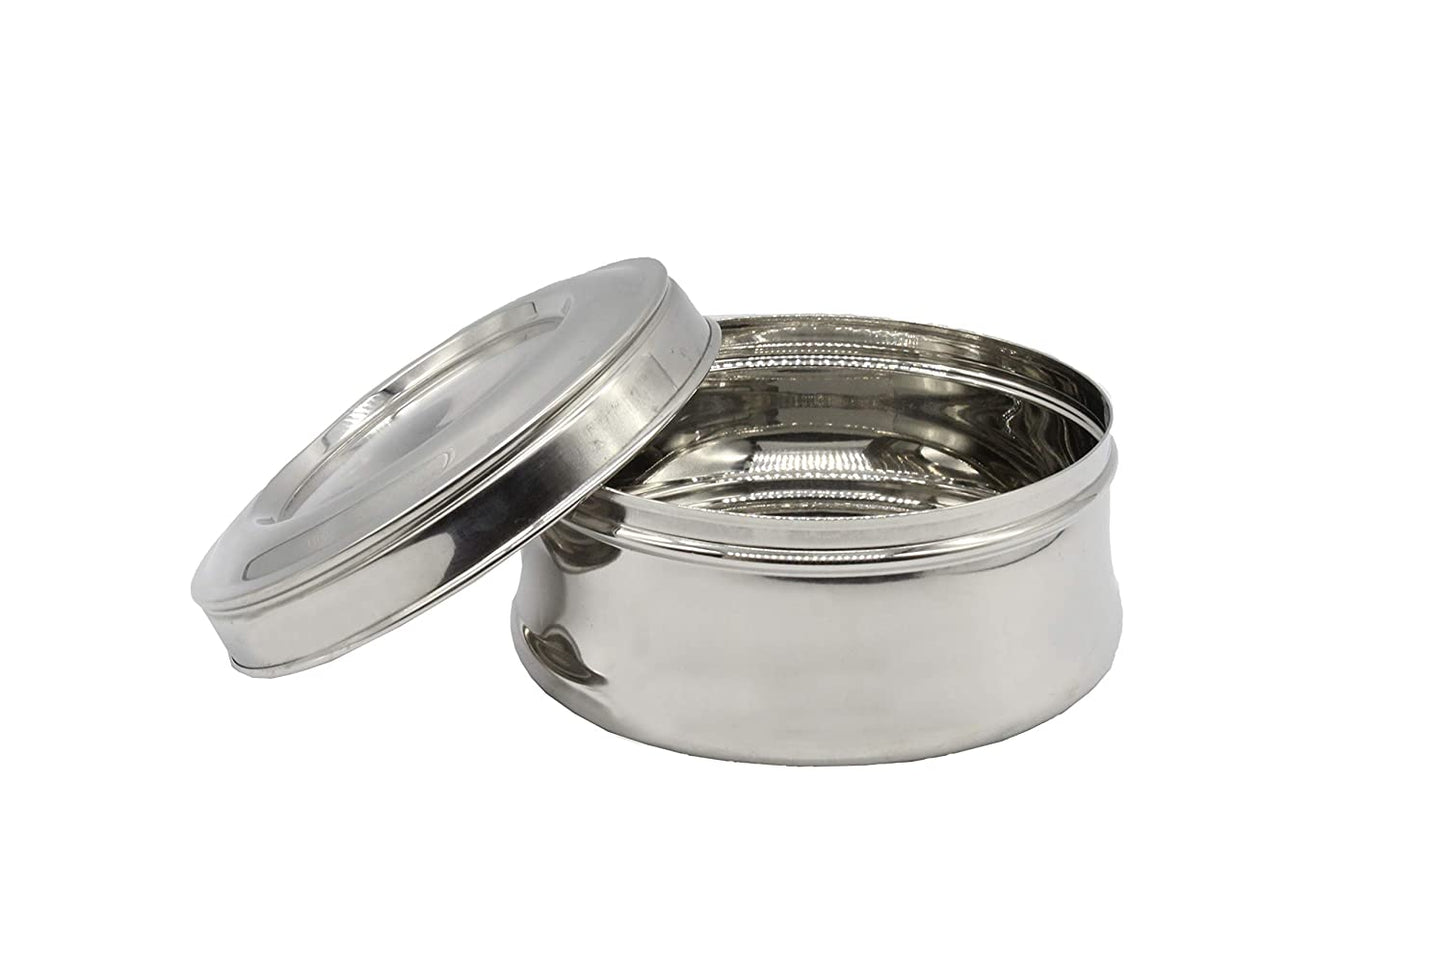 Stainless Steel See Through lid Mili Lunch Box | Dabba (14cm) 750ml - Set of 2Pcs.